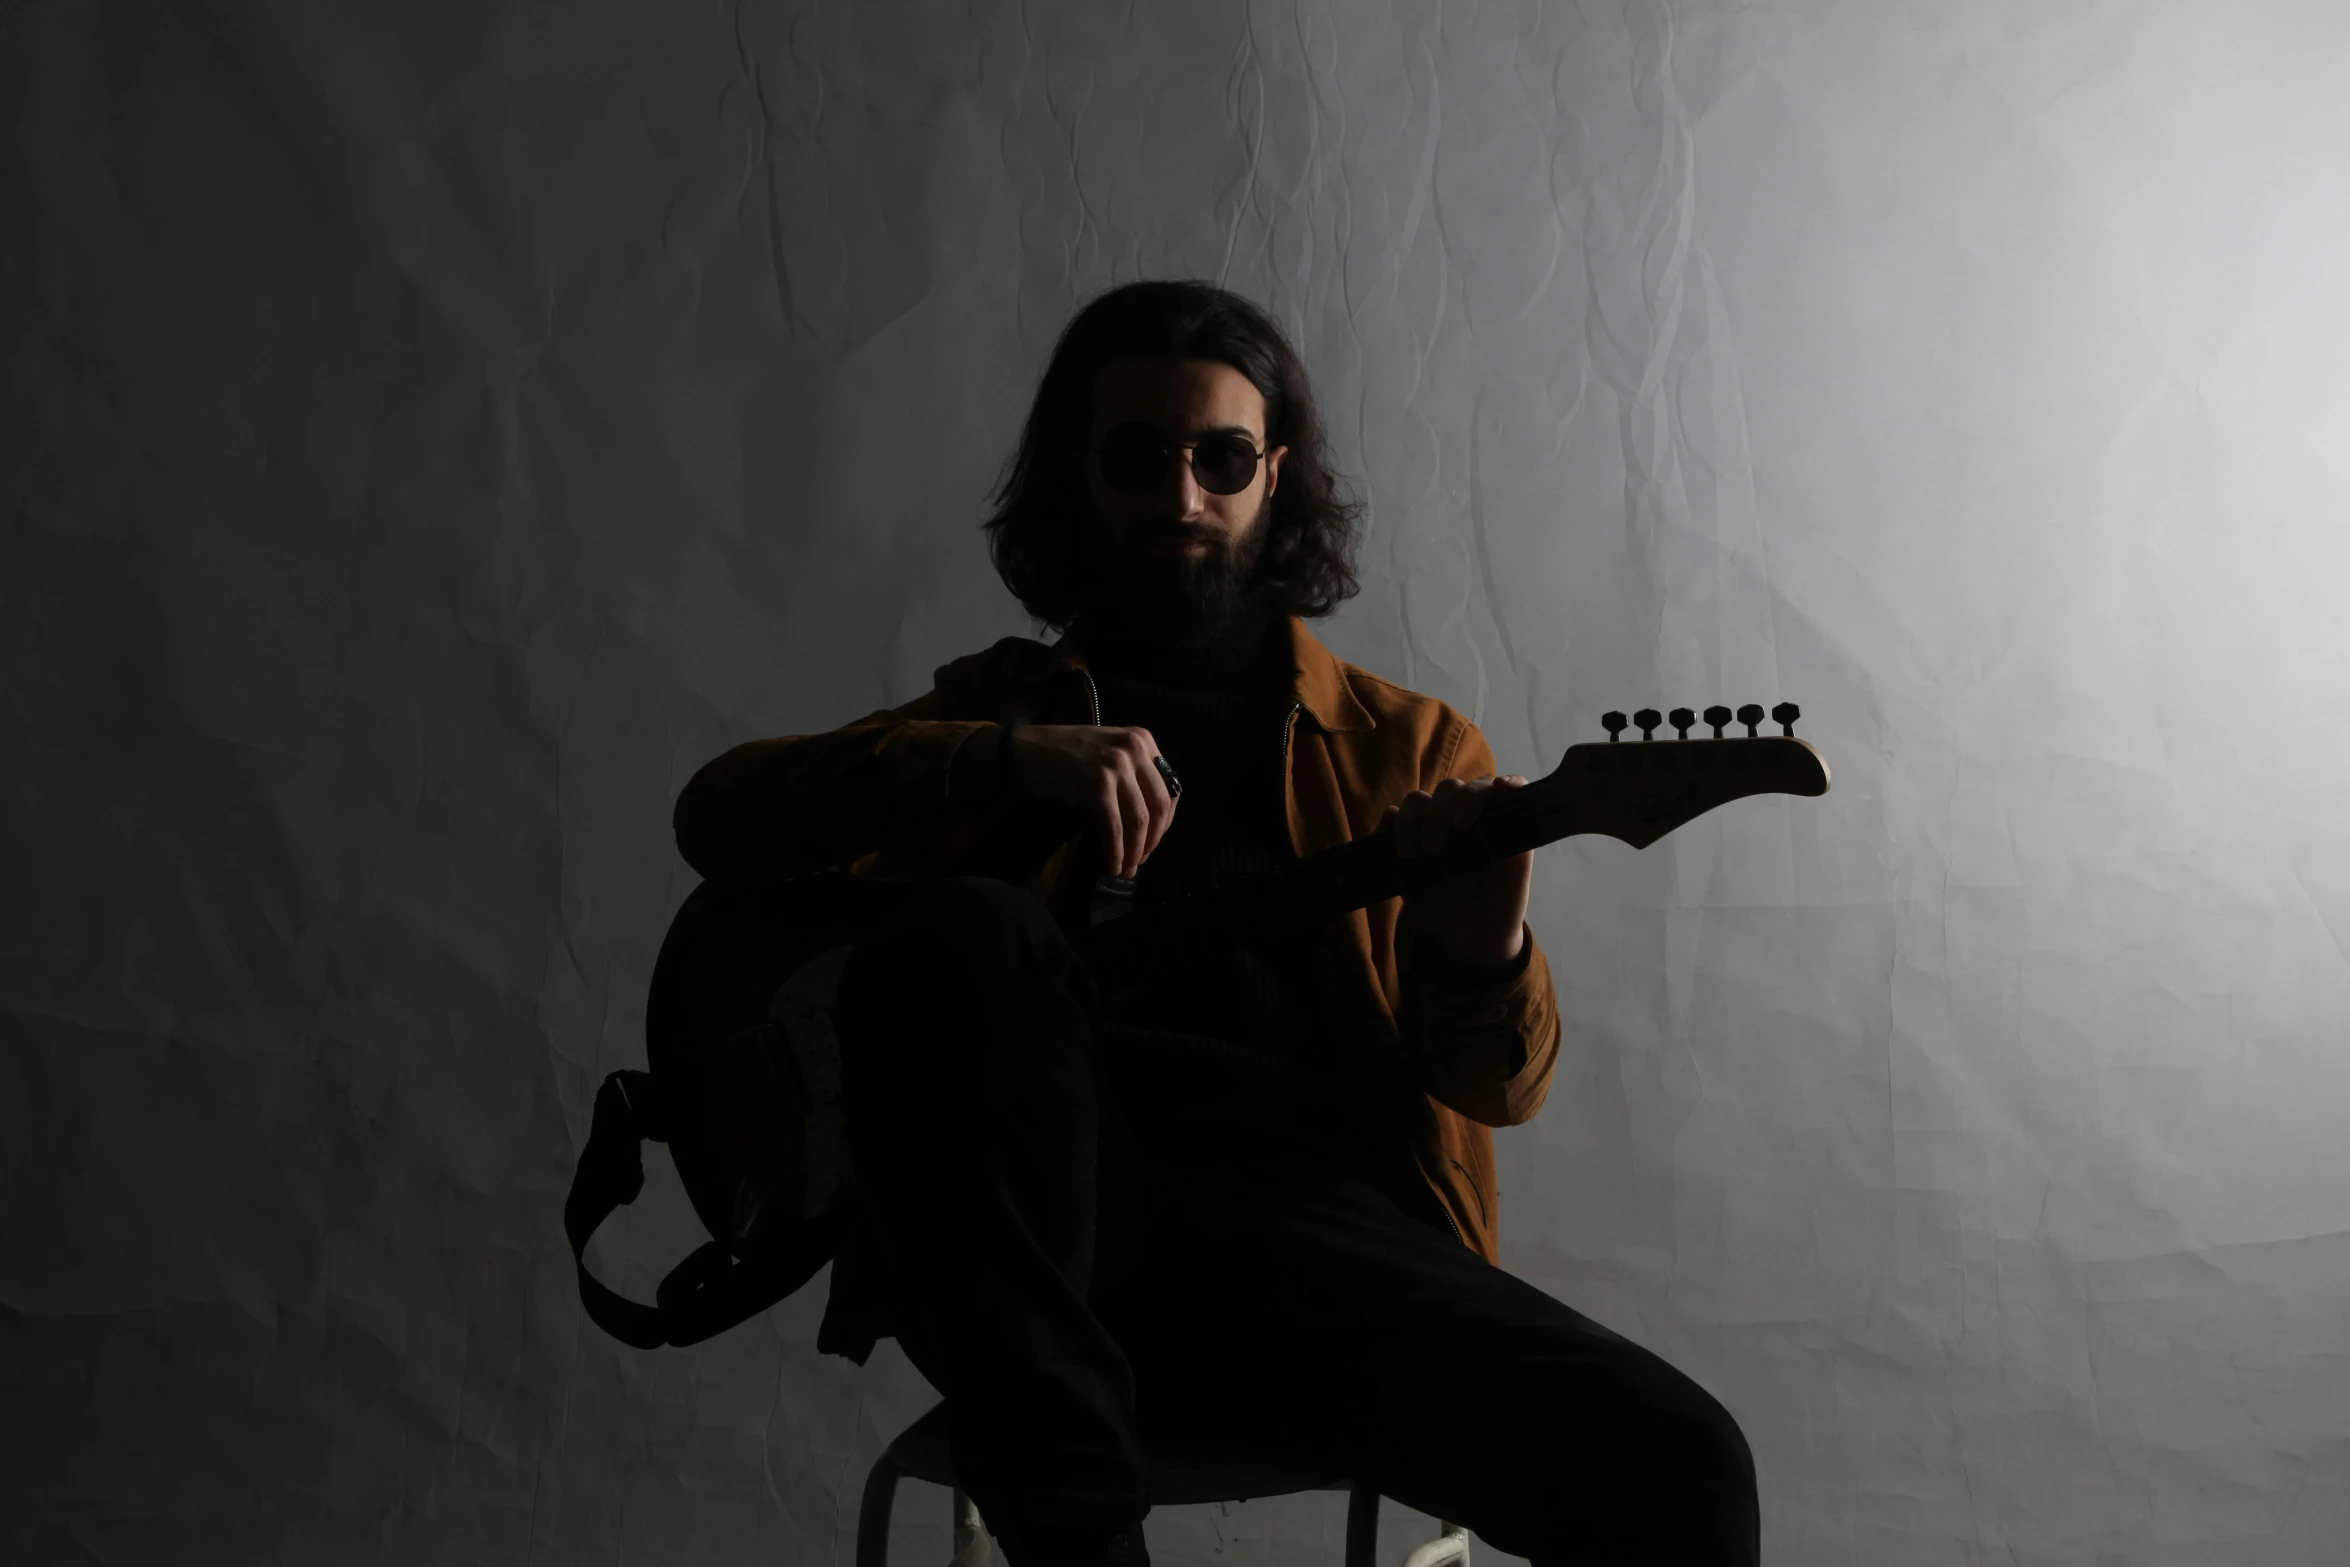 a man sitting in a chair with a guitar, kyza saleem, plain background, lit from behind, man with beard